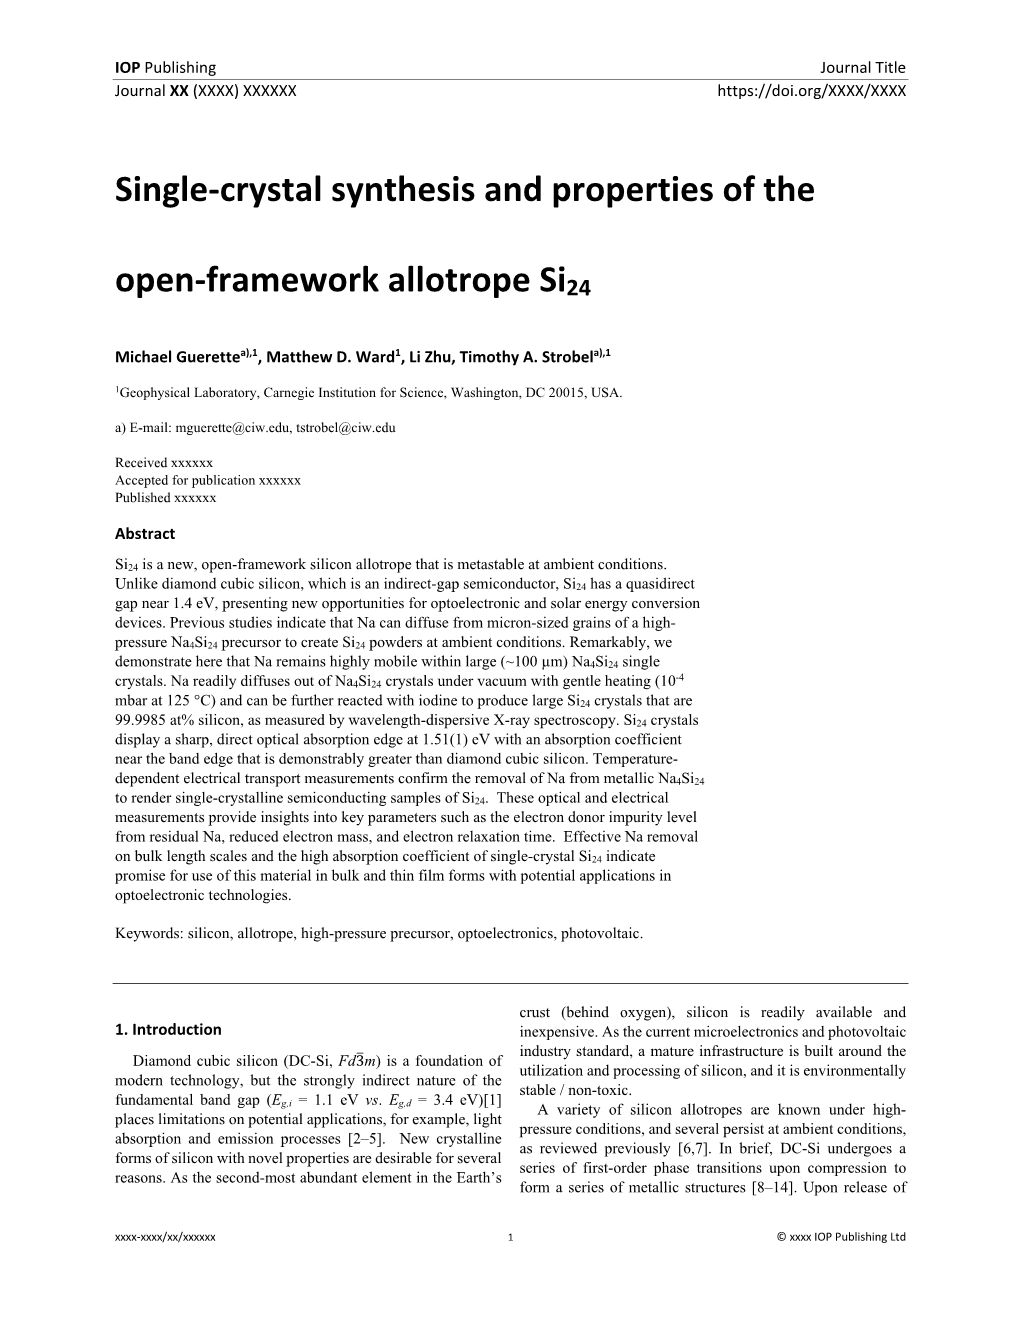 Single‐Crystal Synthesis and Properties of the Open‐Framework Allotrope Si24